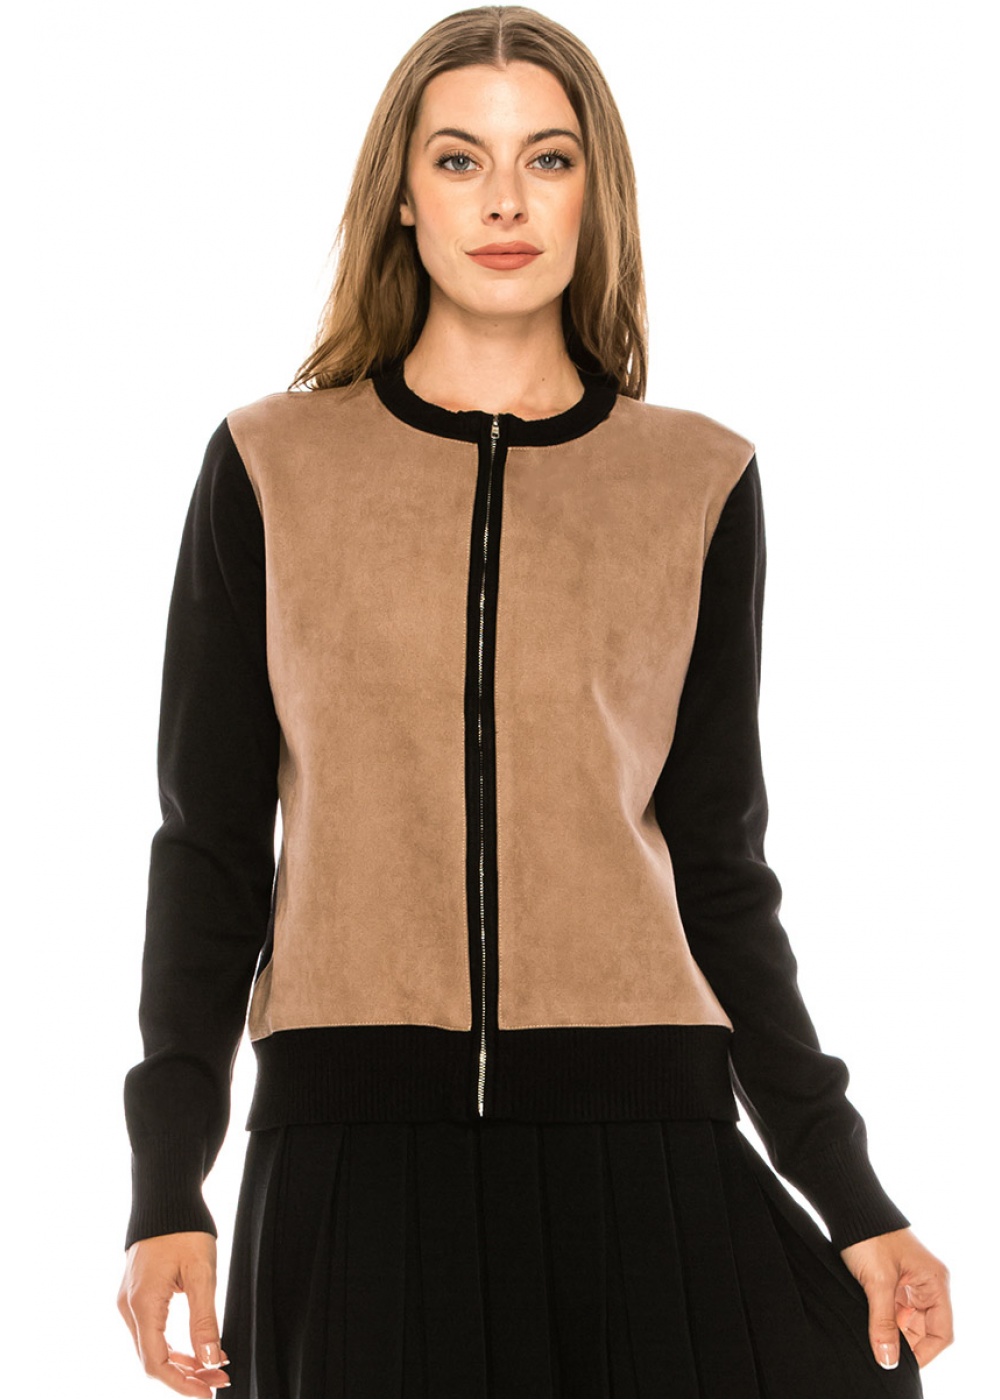 Two-colored zip-through cardigan in taupe